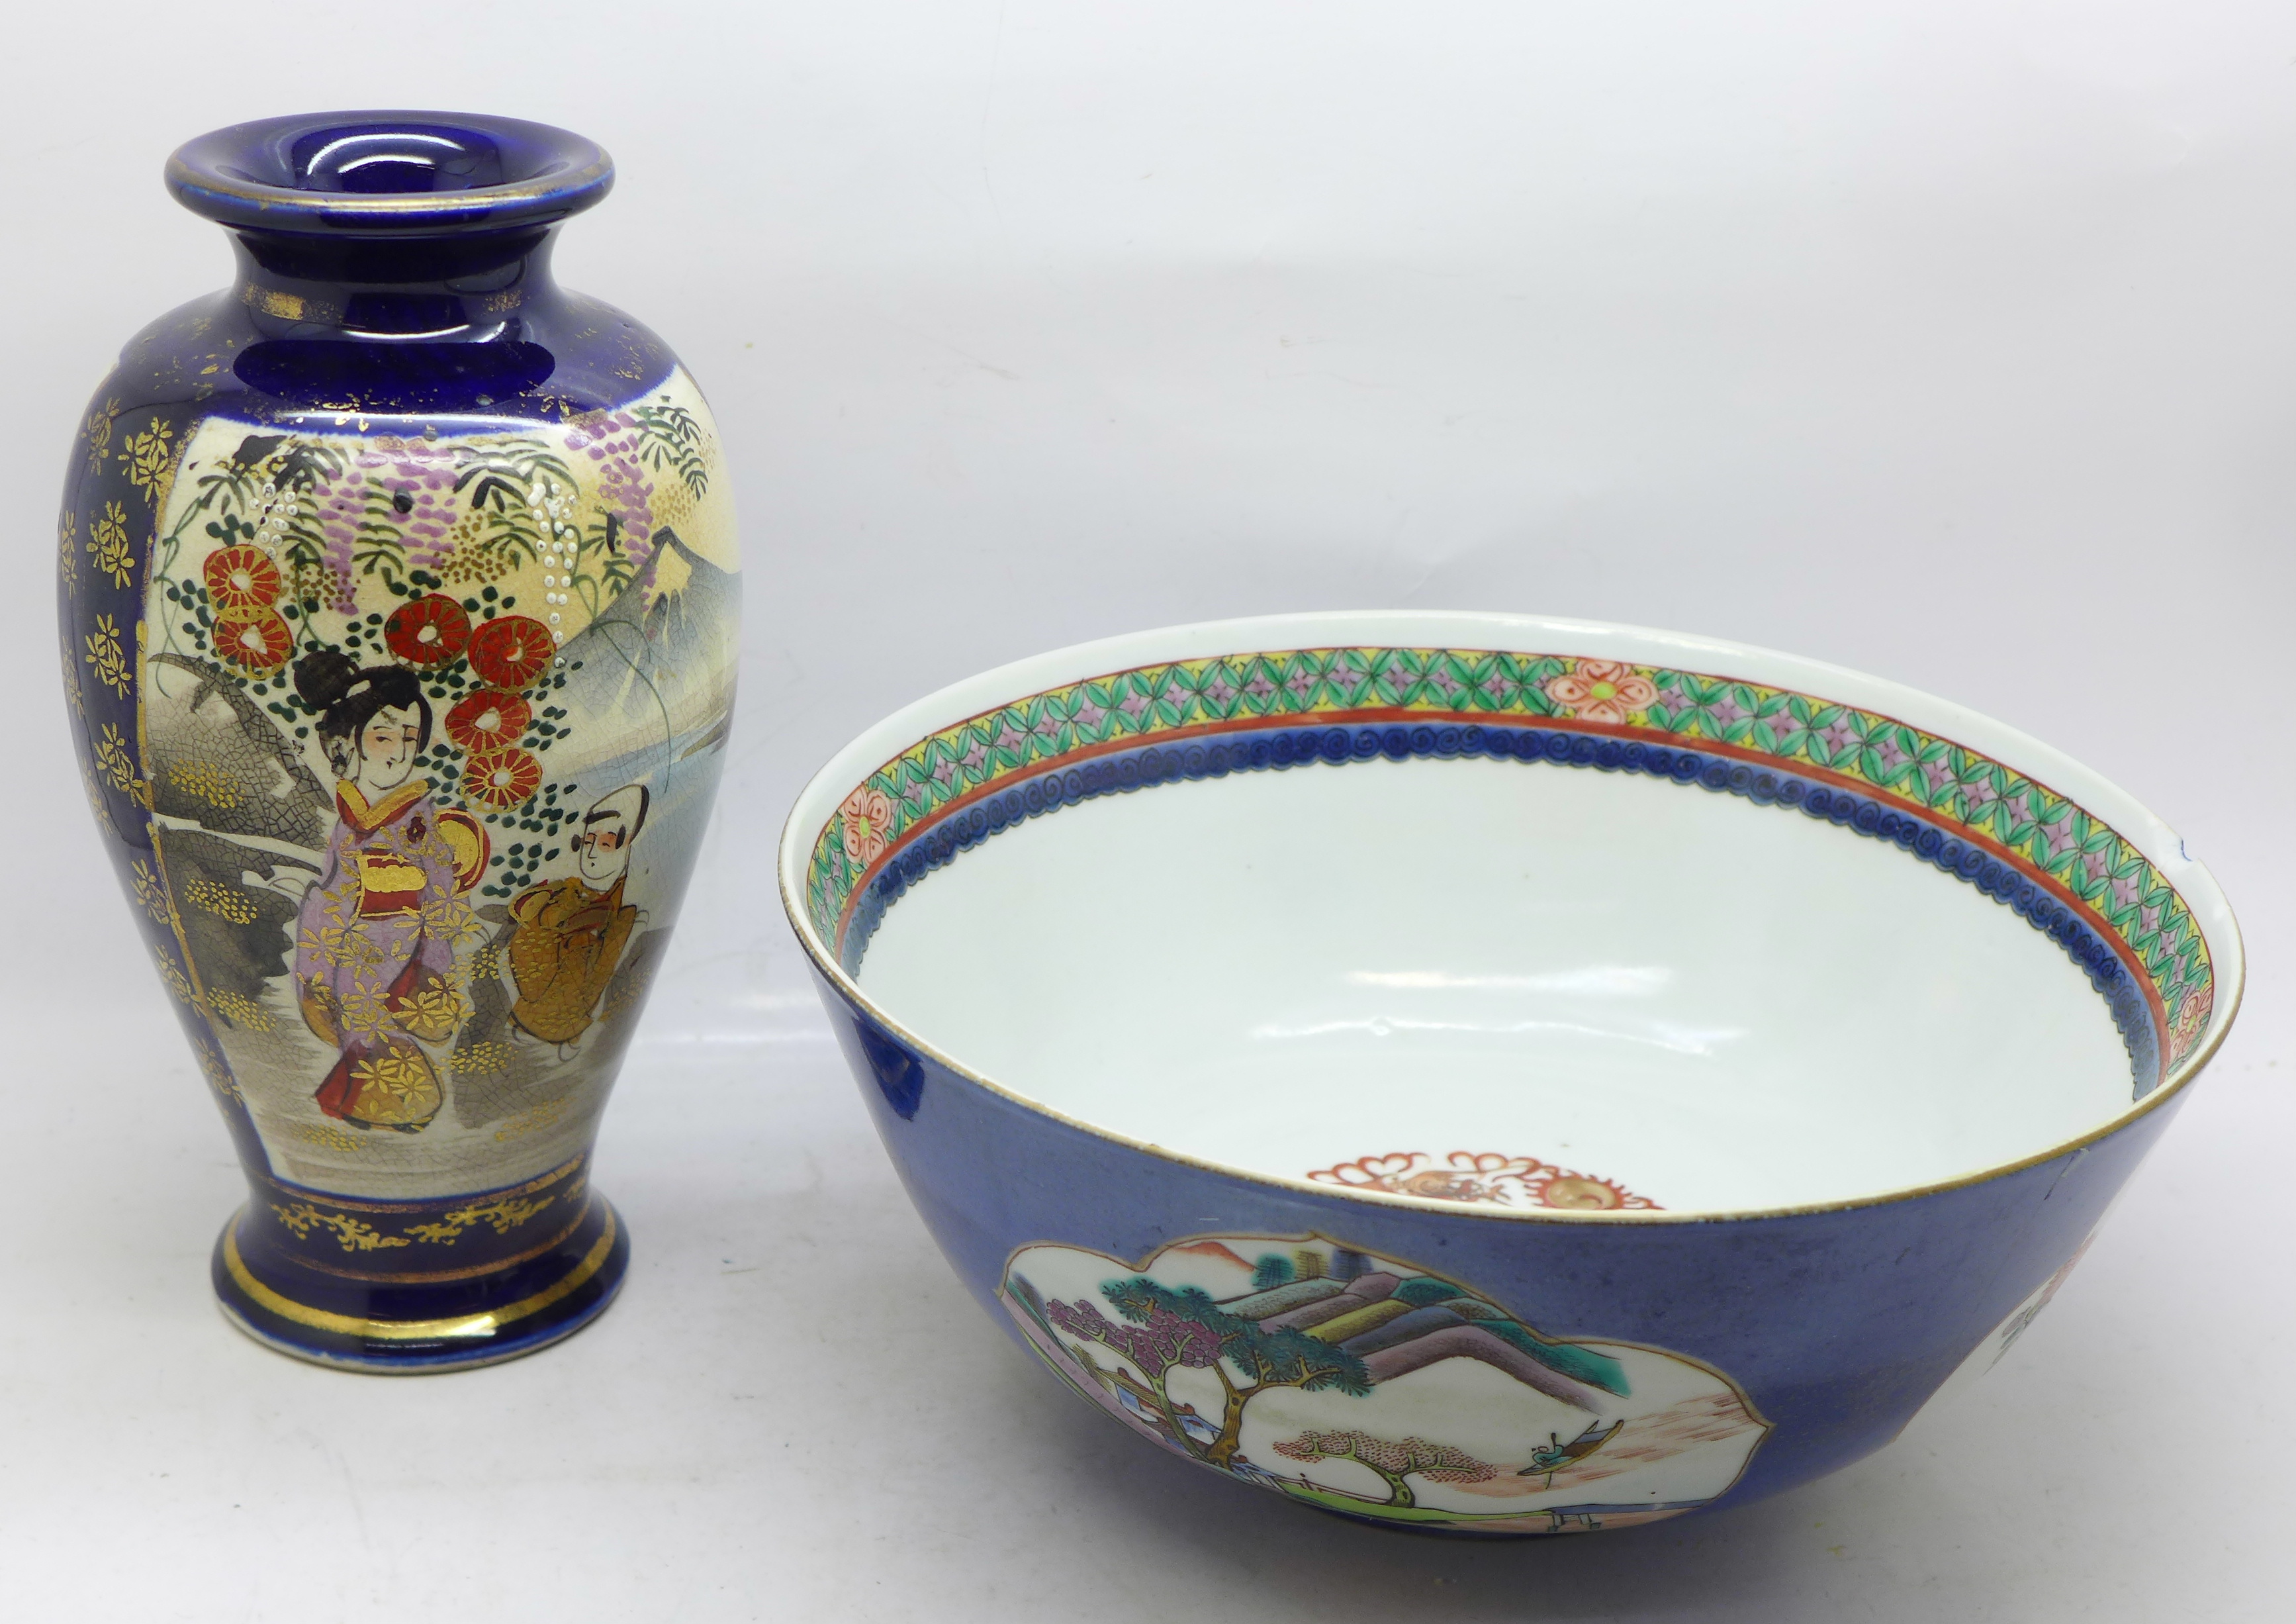 A Chinese blue ground famille rose hand painted porcelain bowl with panels of figures, flowers and